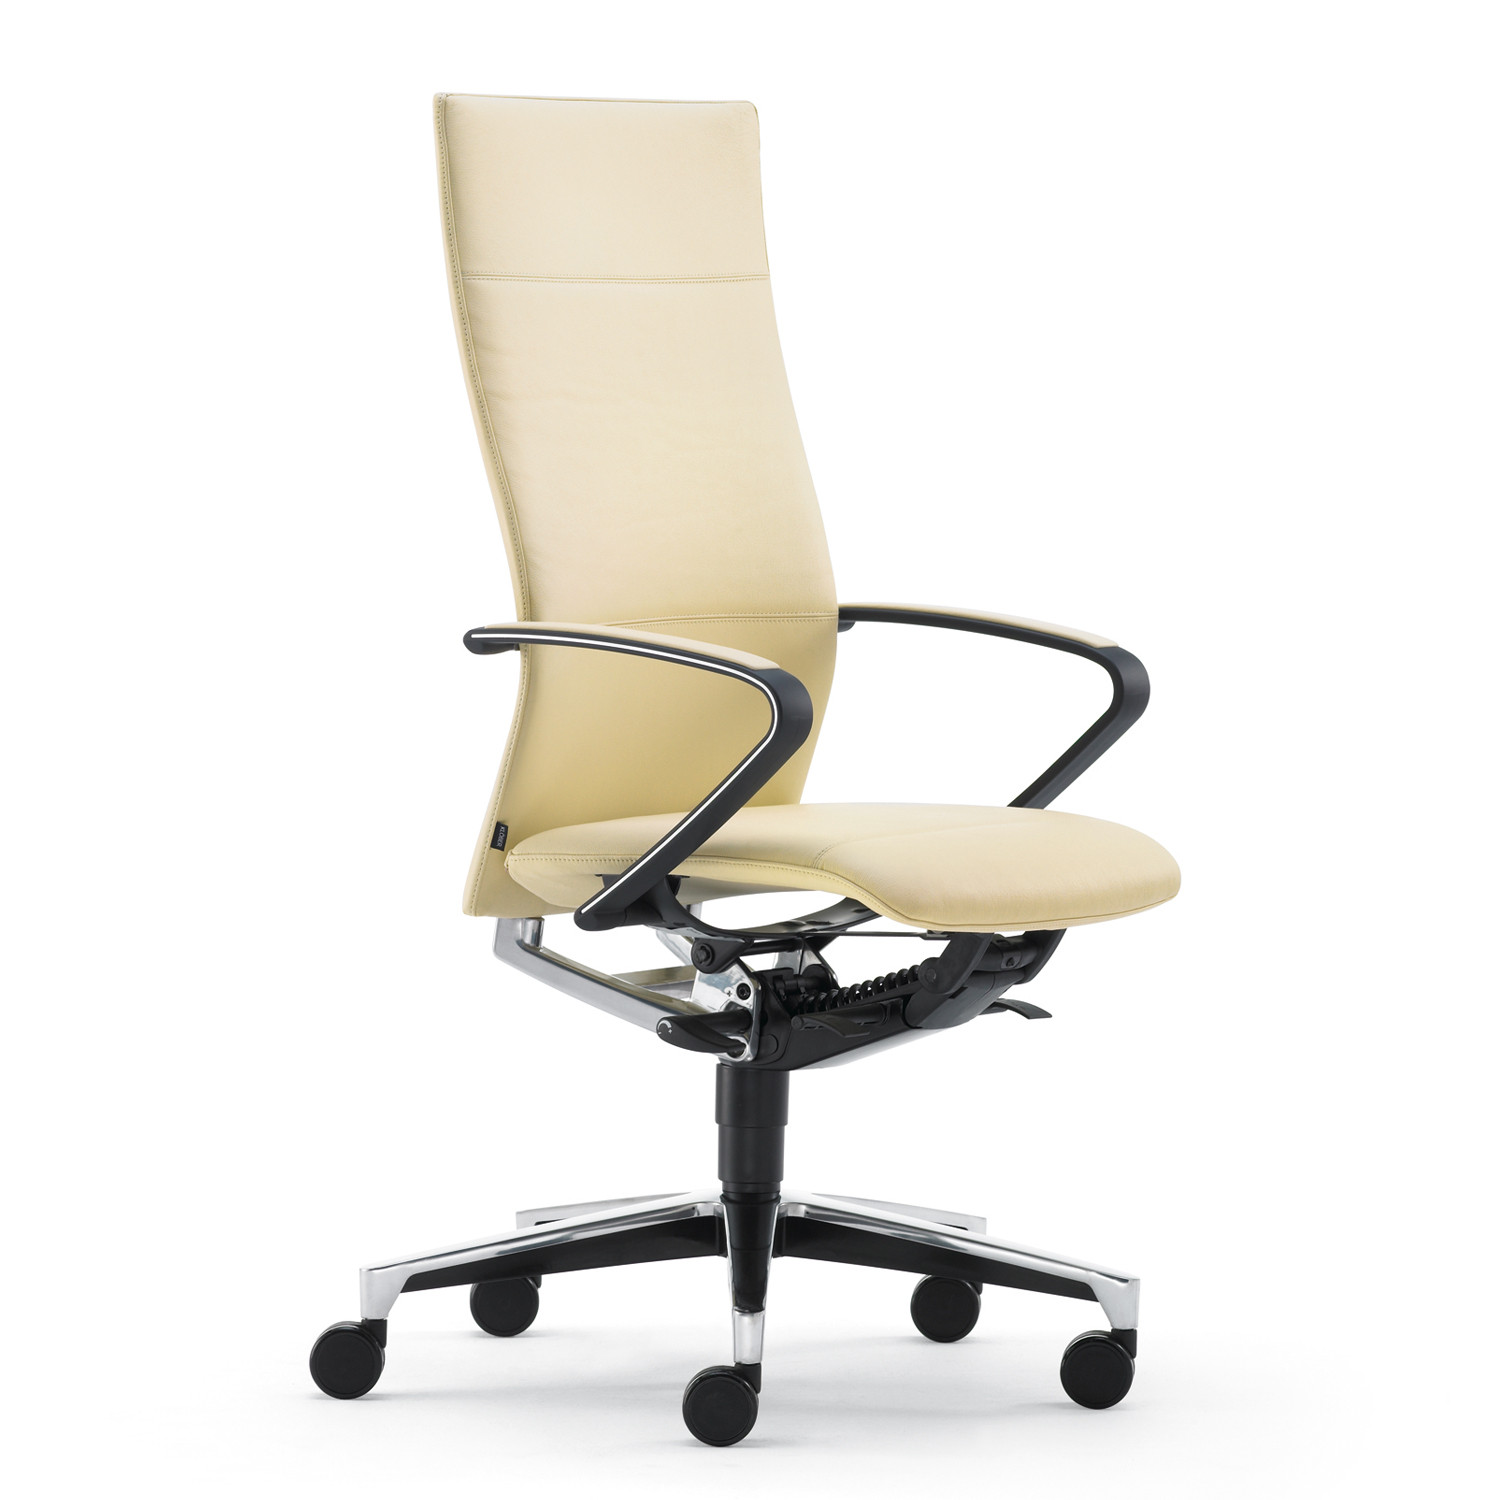 Ciello Executive Chairs by Klober